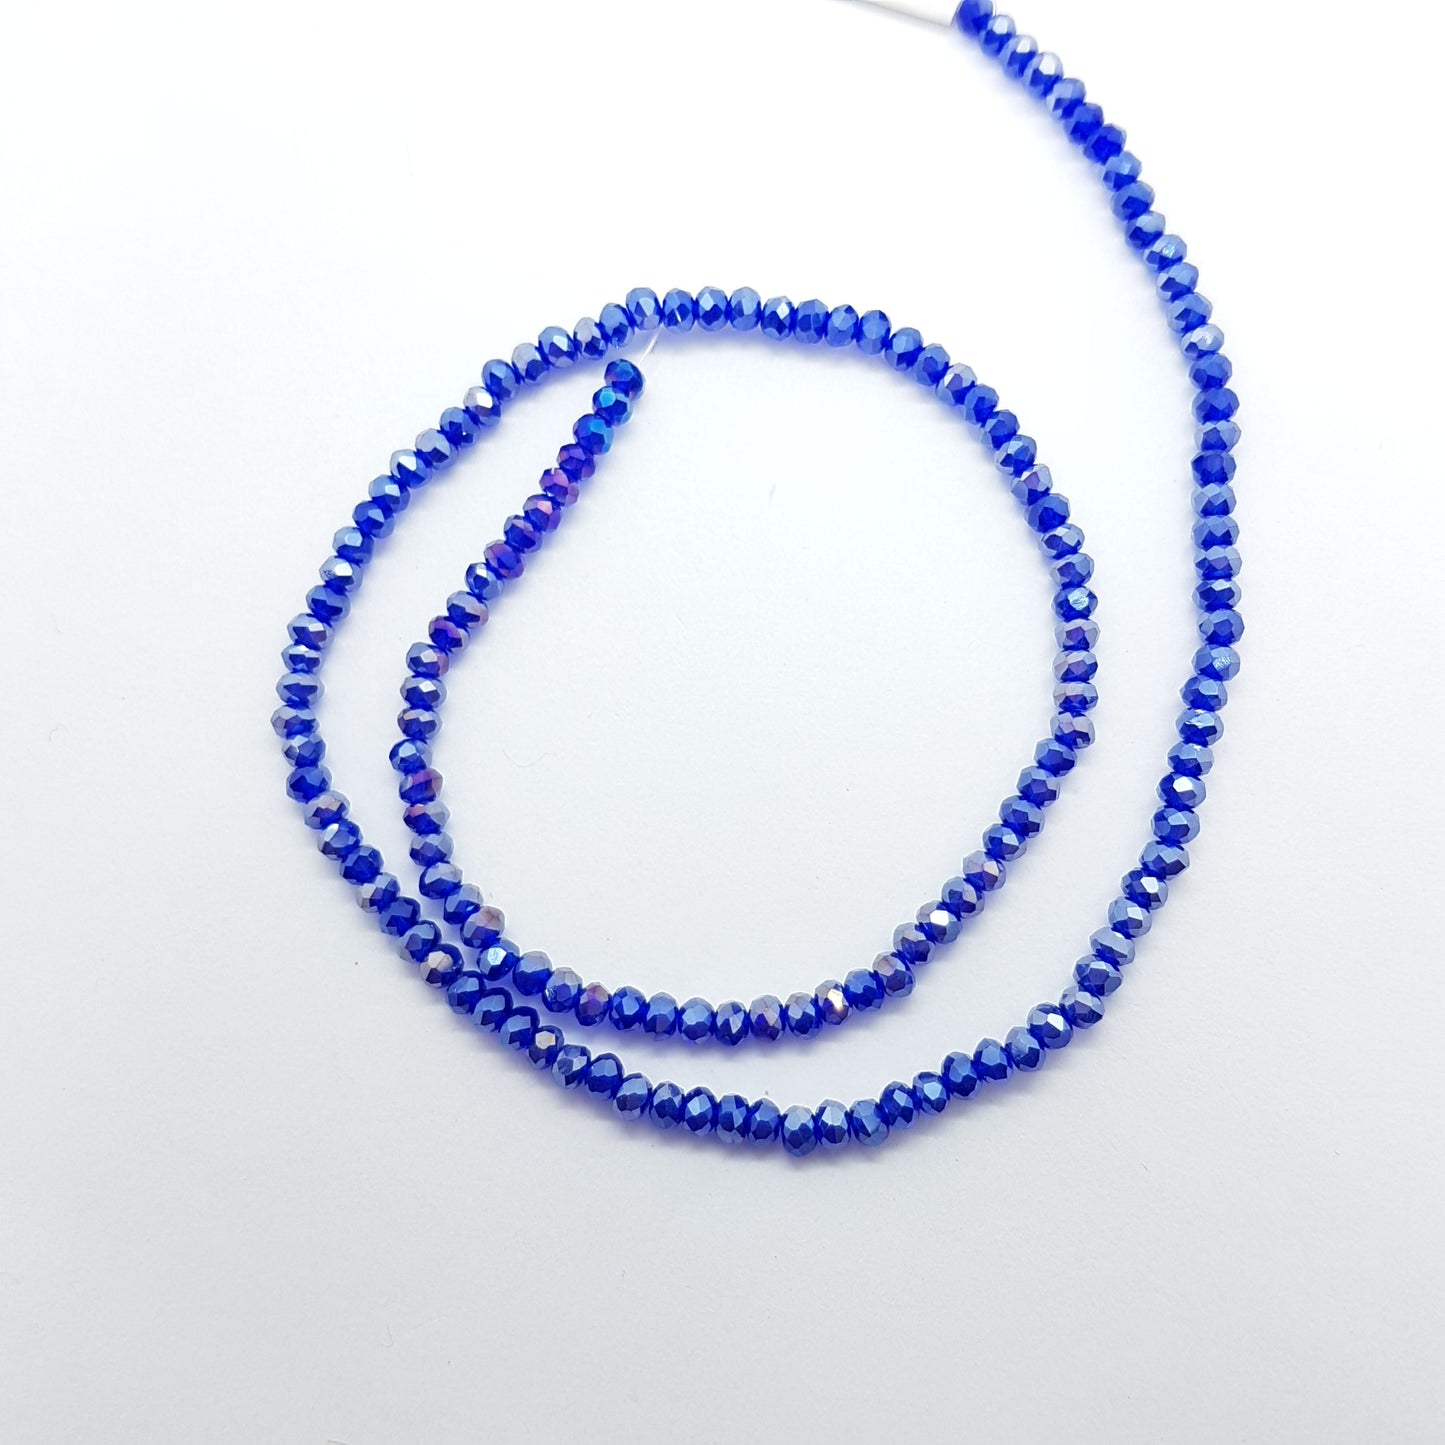 Blue Crystal Rondelle Beads